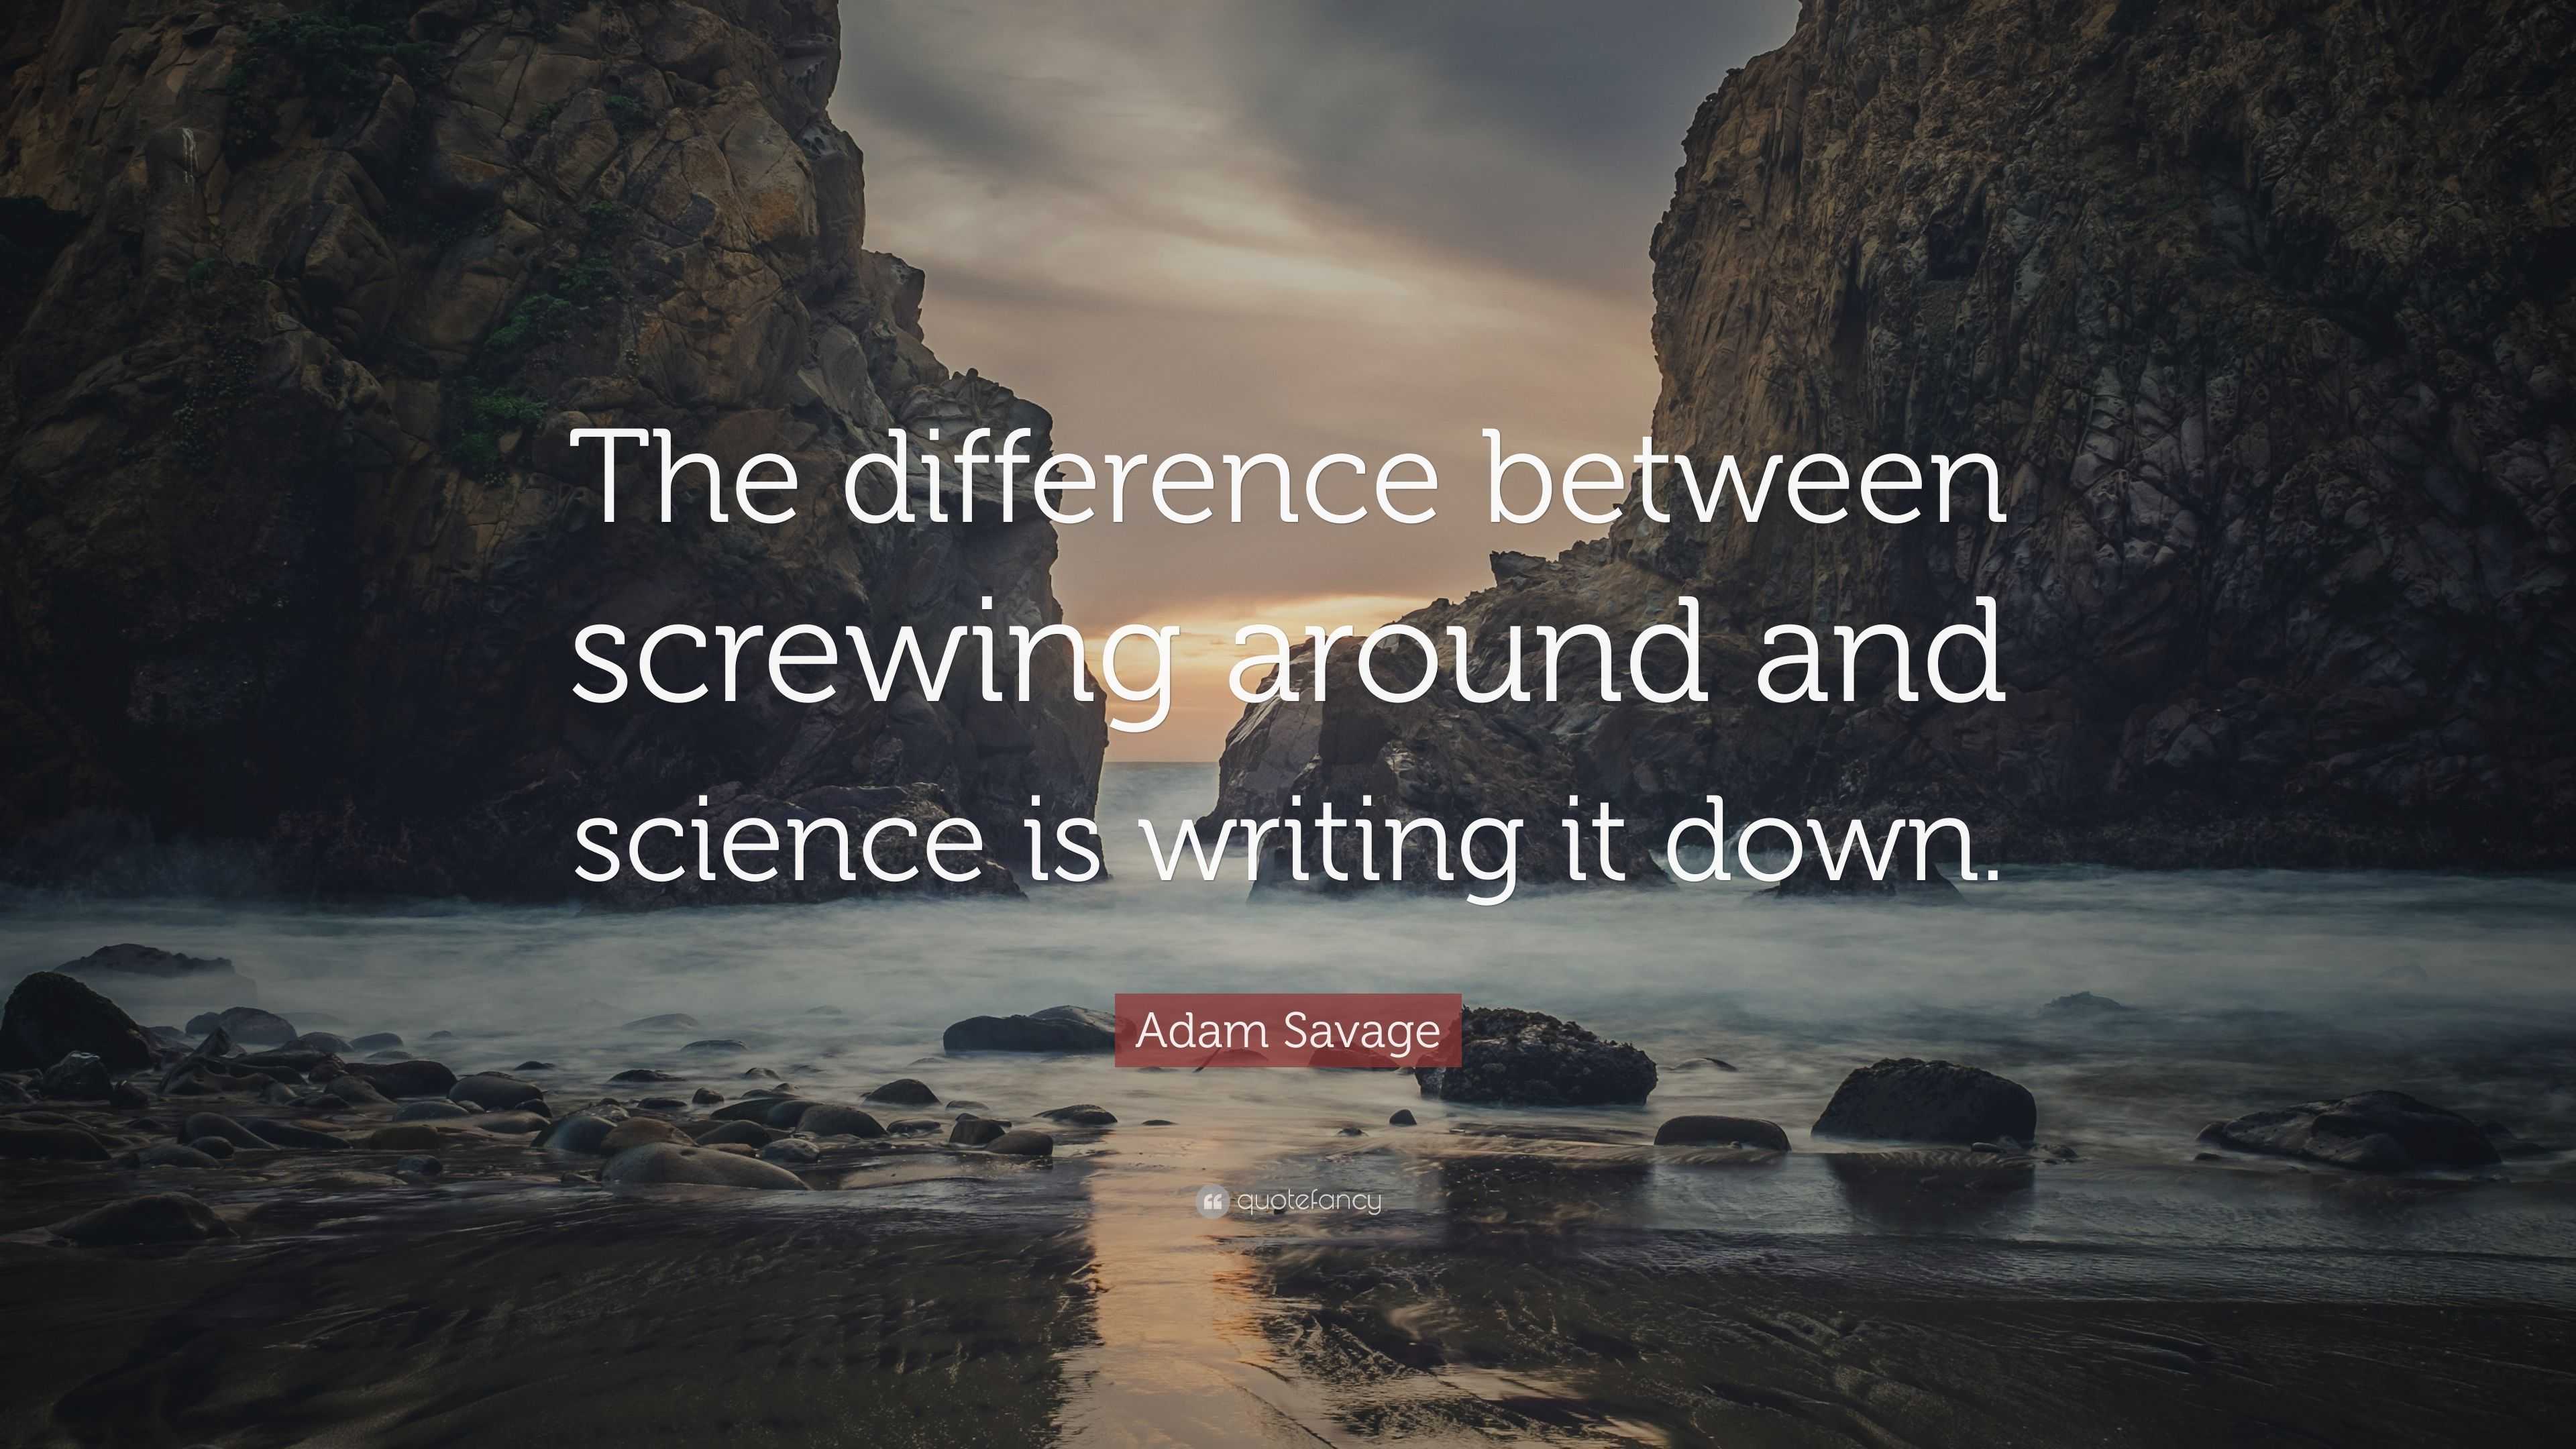 Adam Savage Quote: “The difference between screwing around and science ...